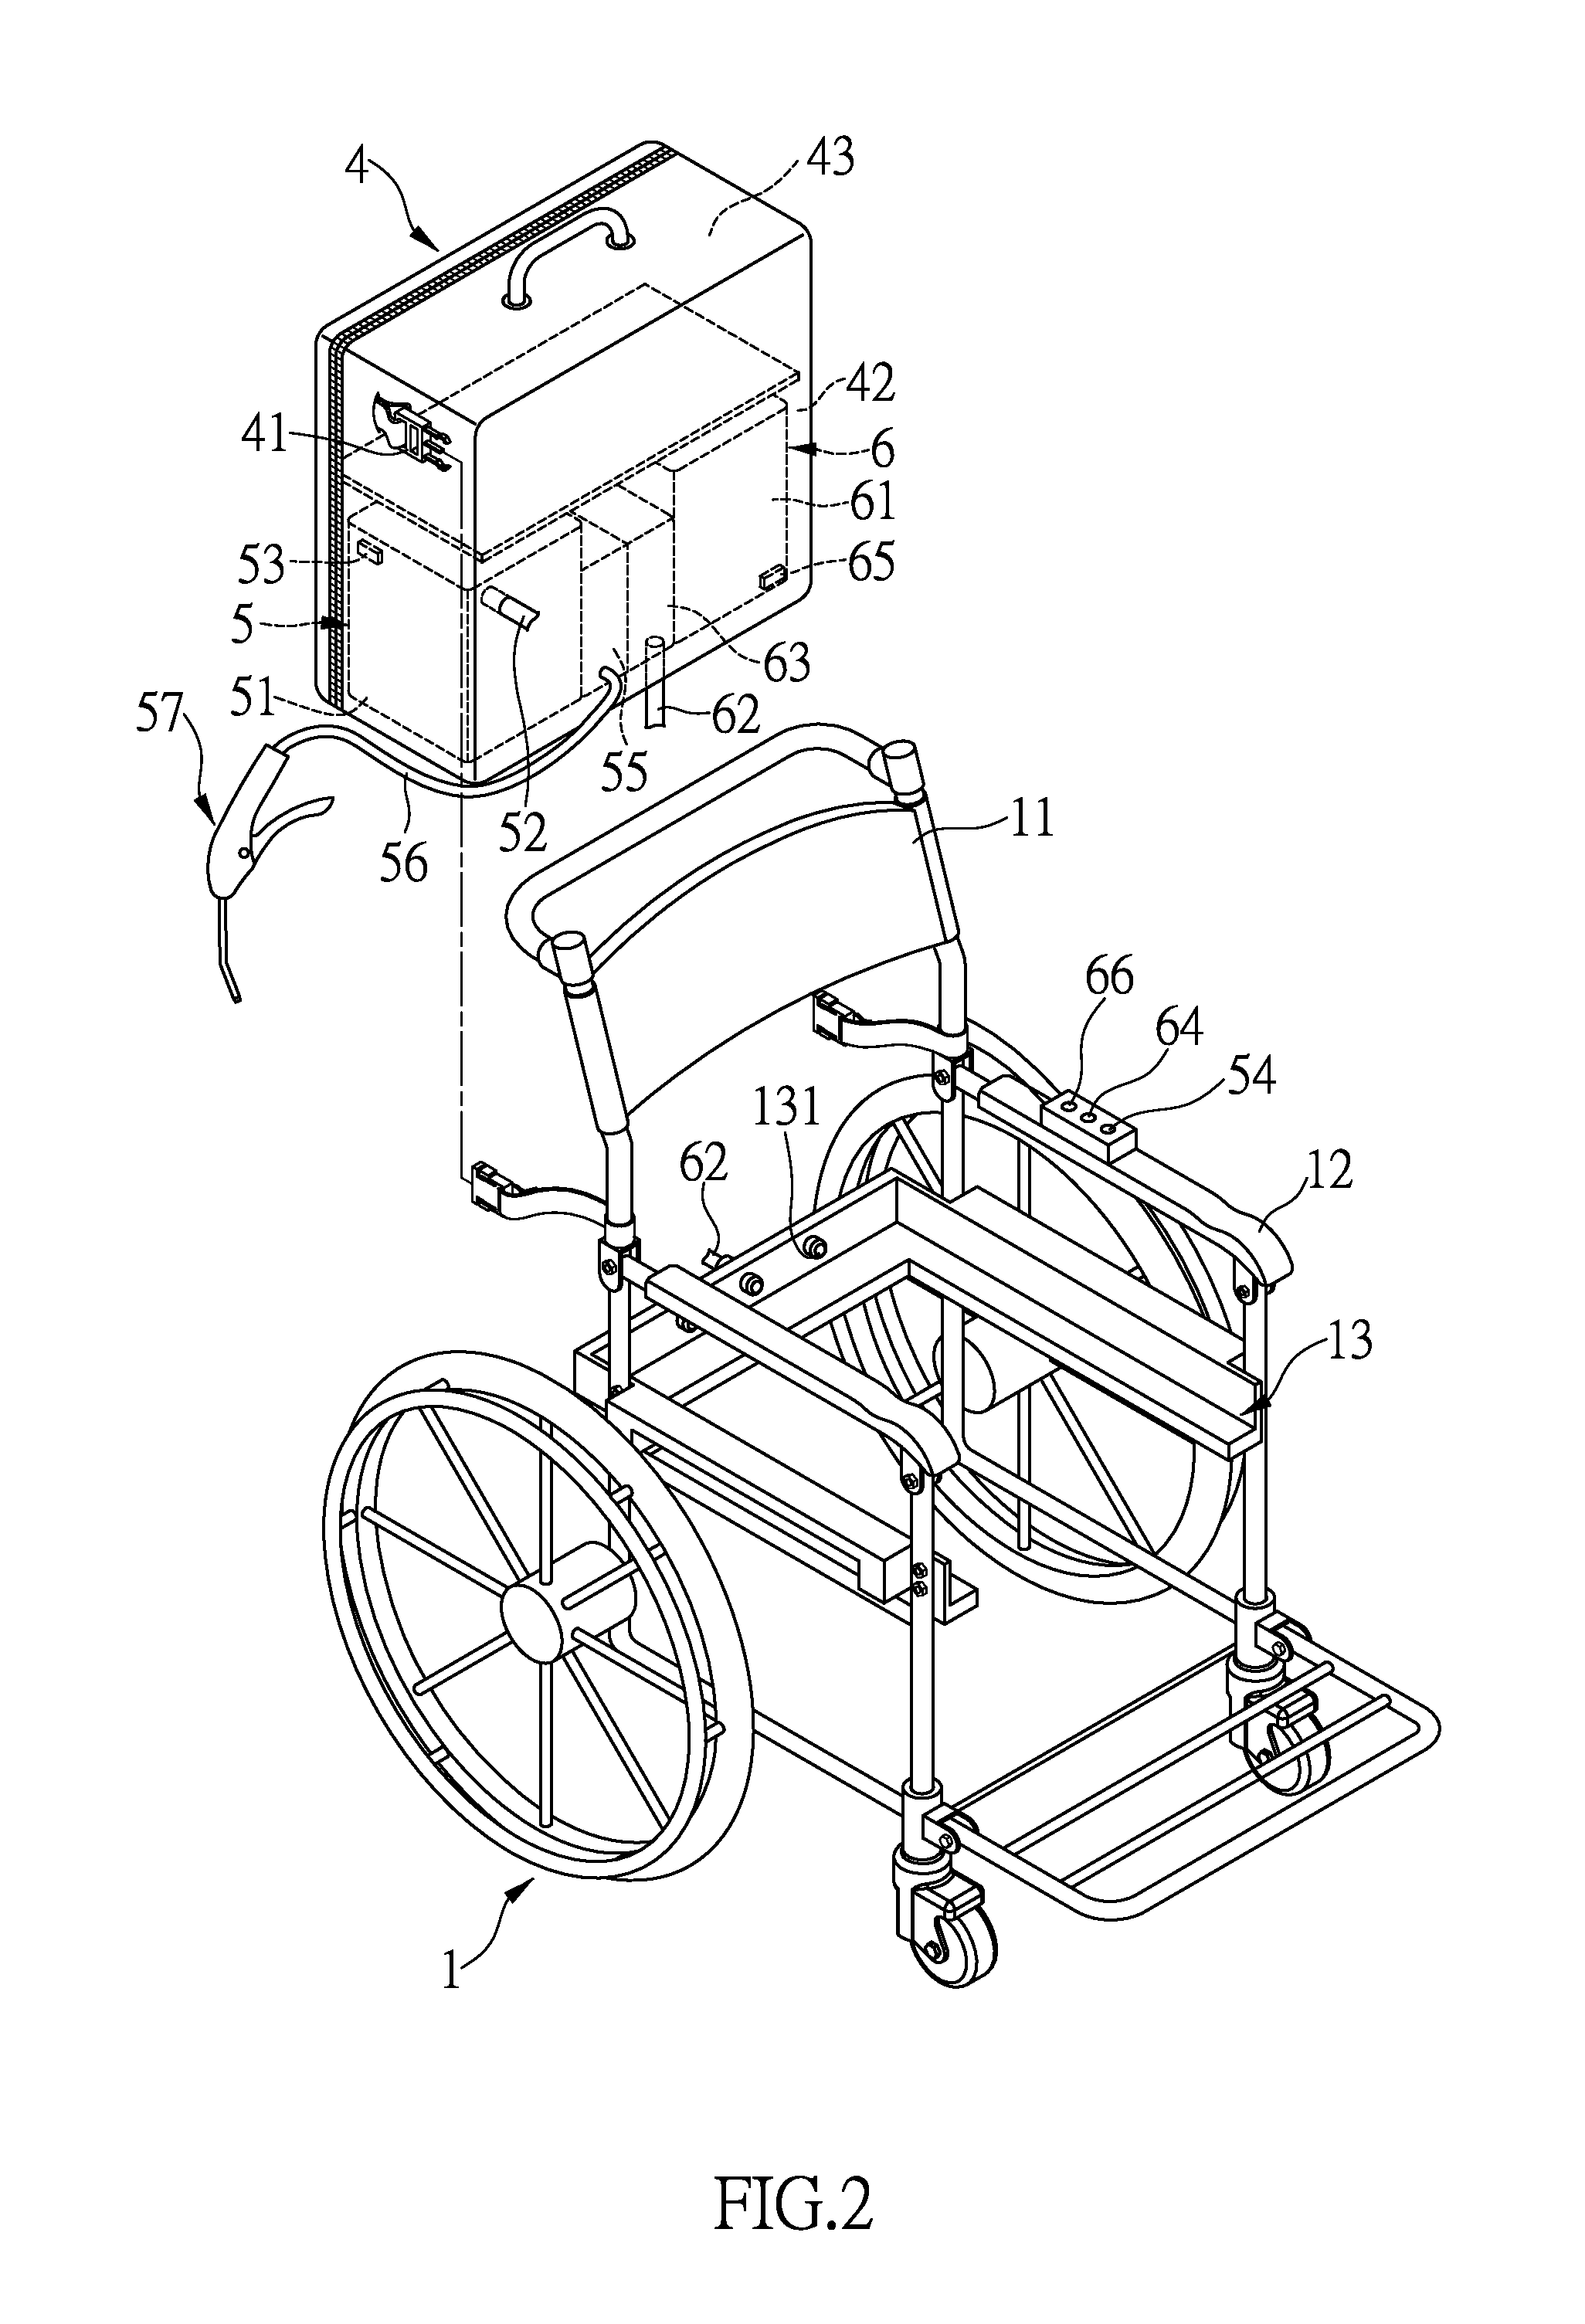 Wheel chair with urinal device